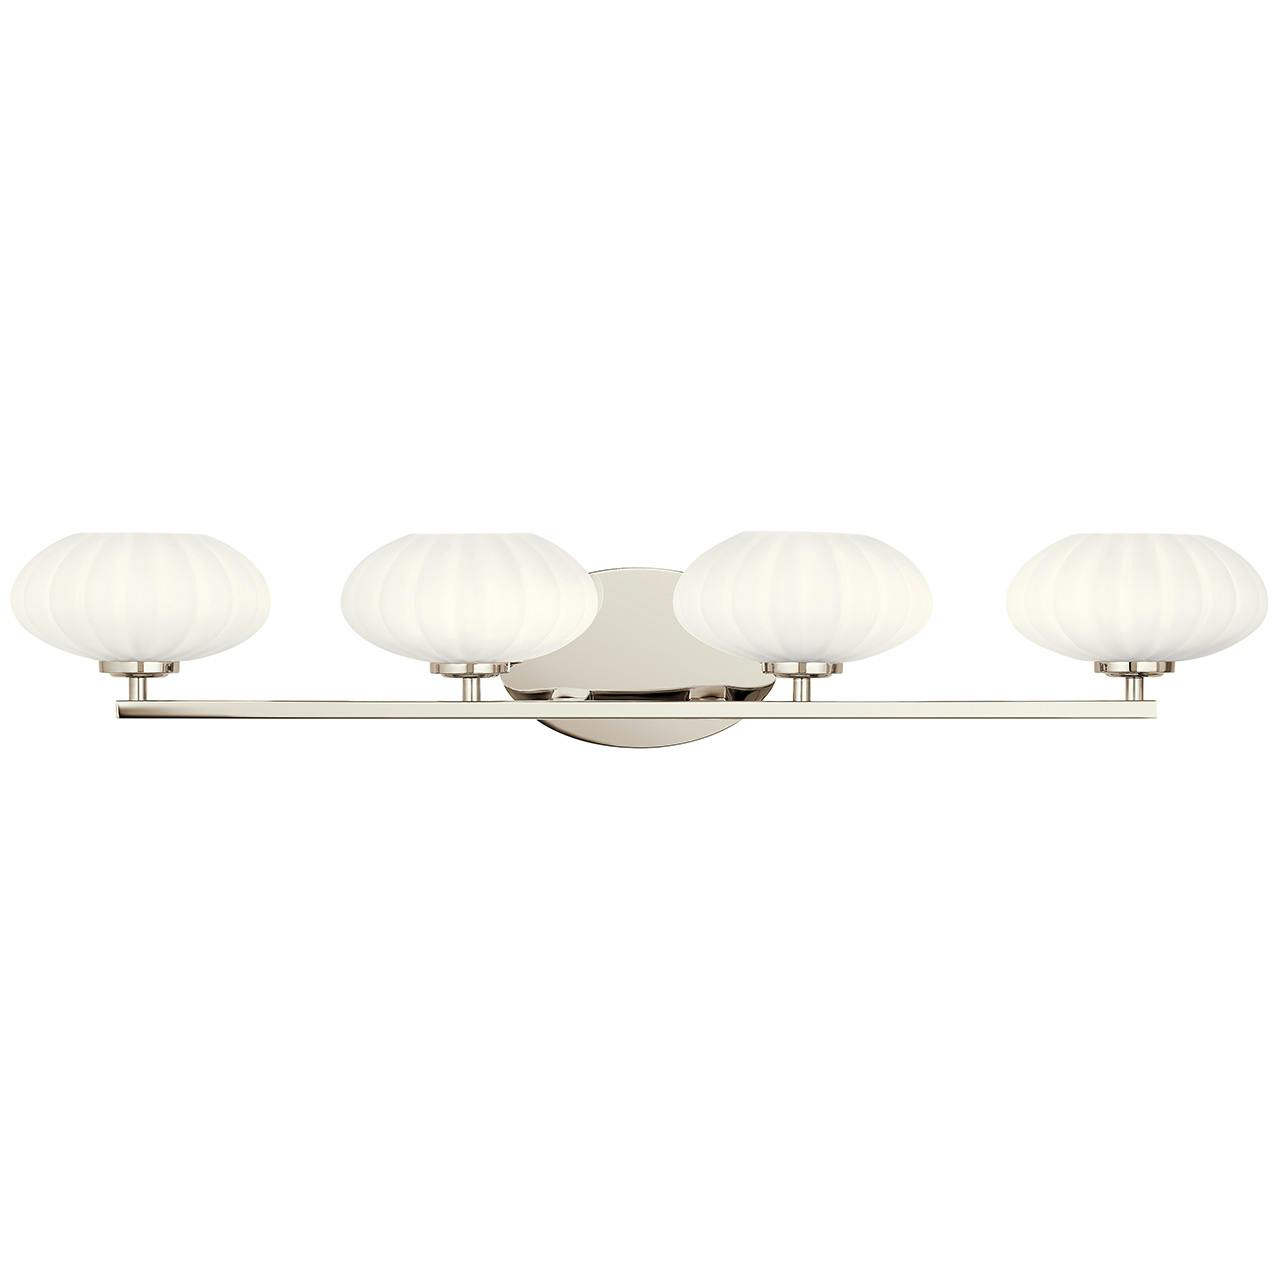 The Pim 34" 4 Light Vanity Light in Nickel facing up on a white background